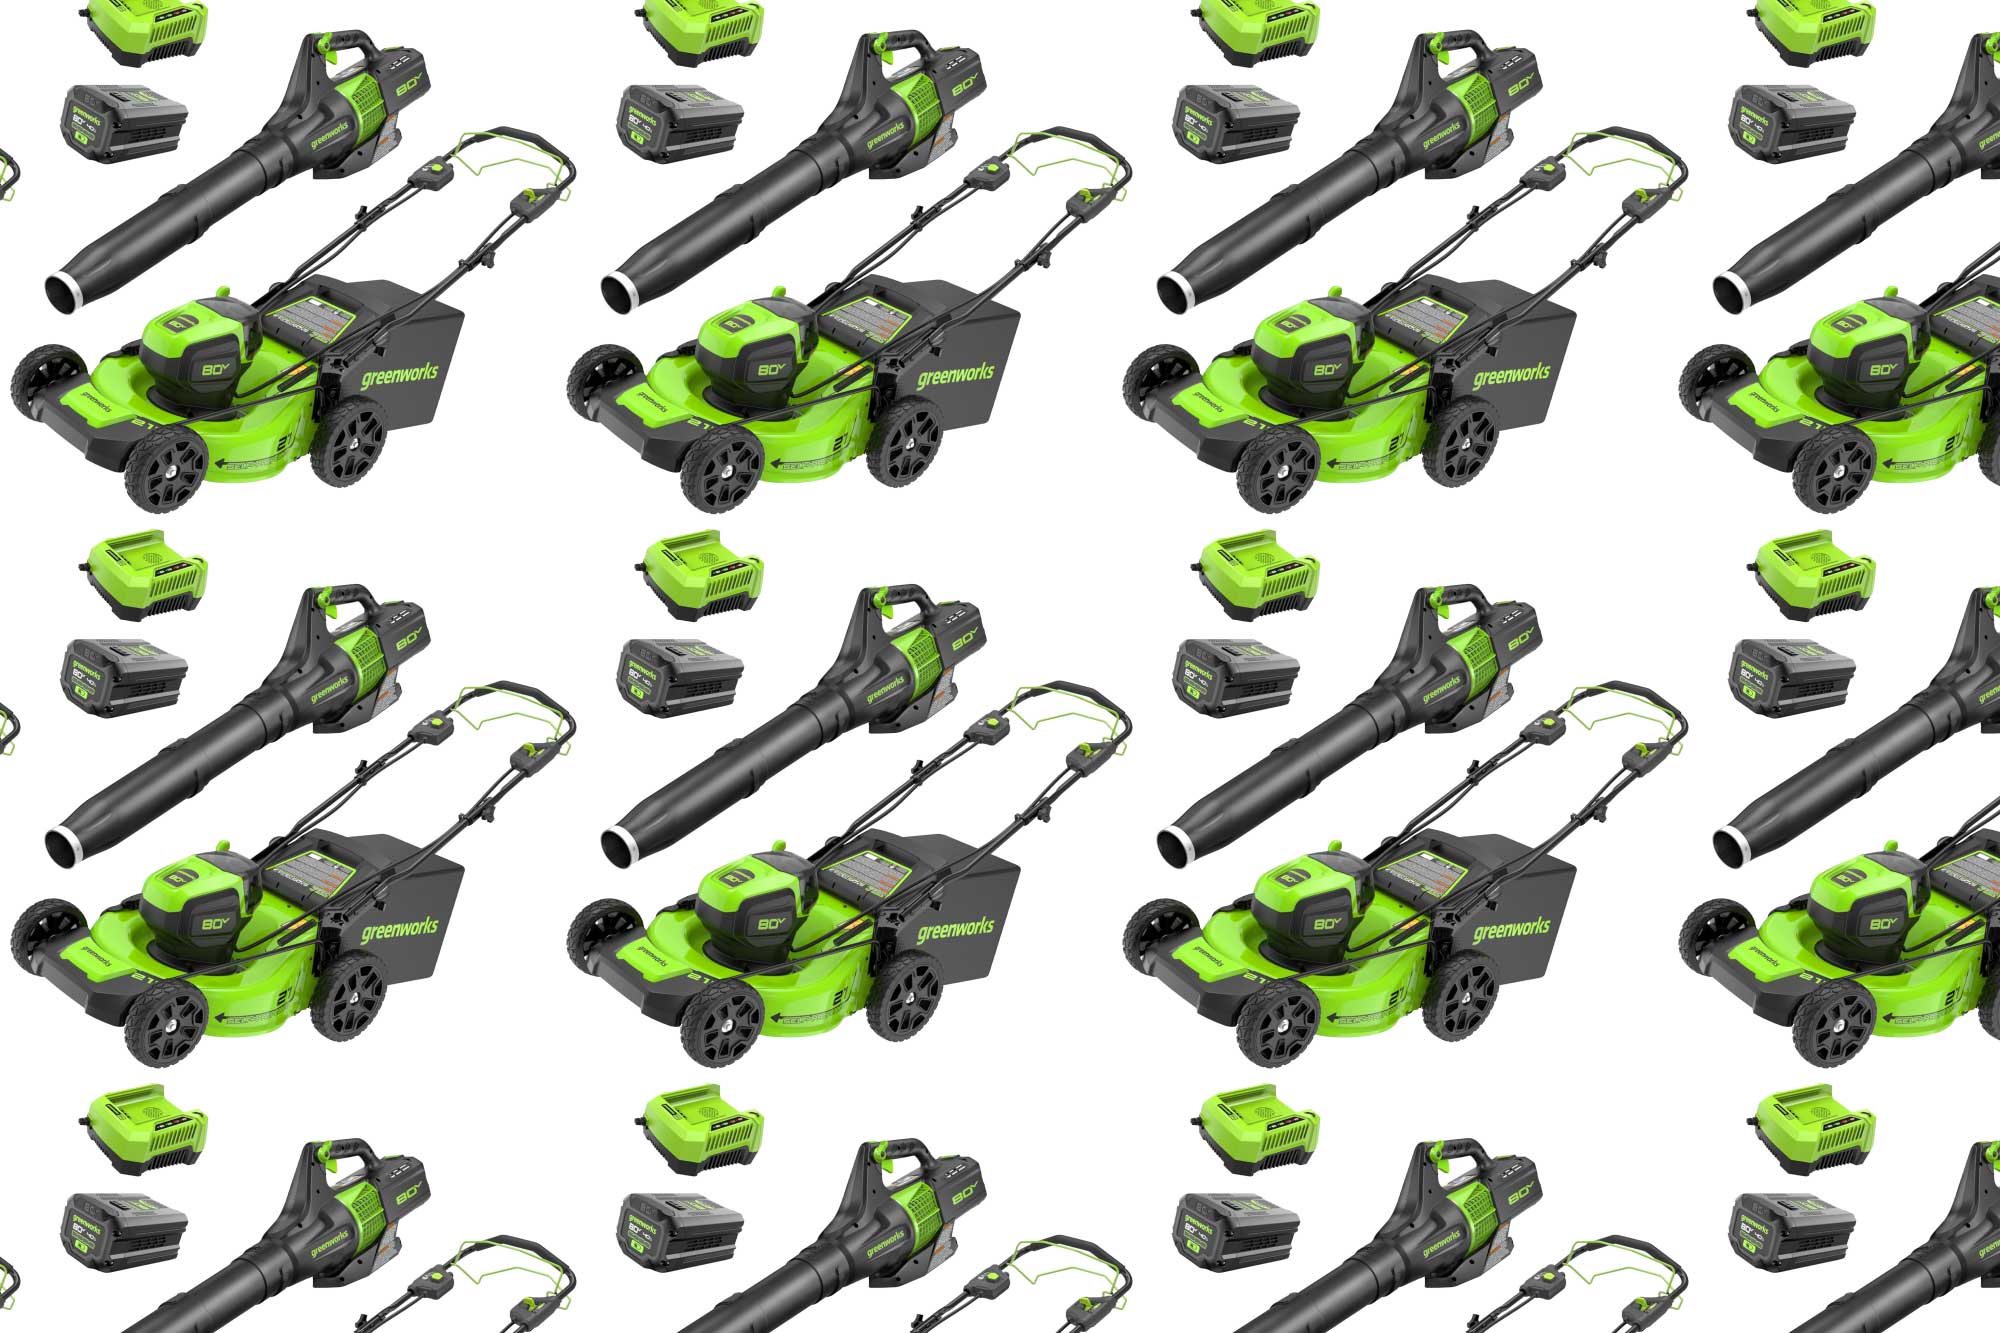 Get the greenest grass in the neighborhood with Greenworks outdoor power equipment deals at Amazon